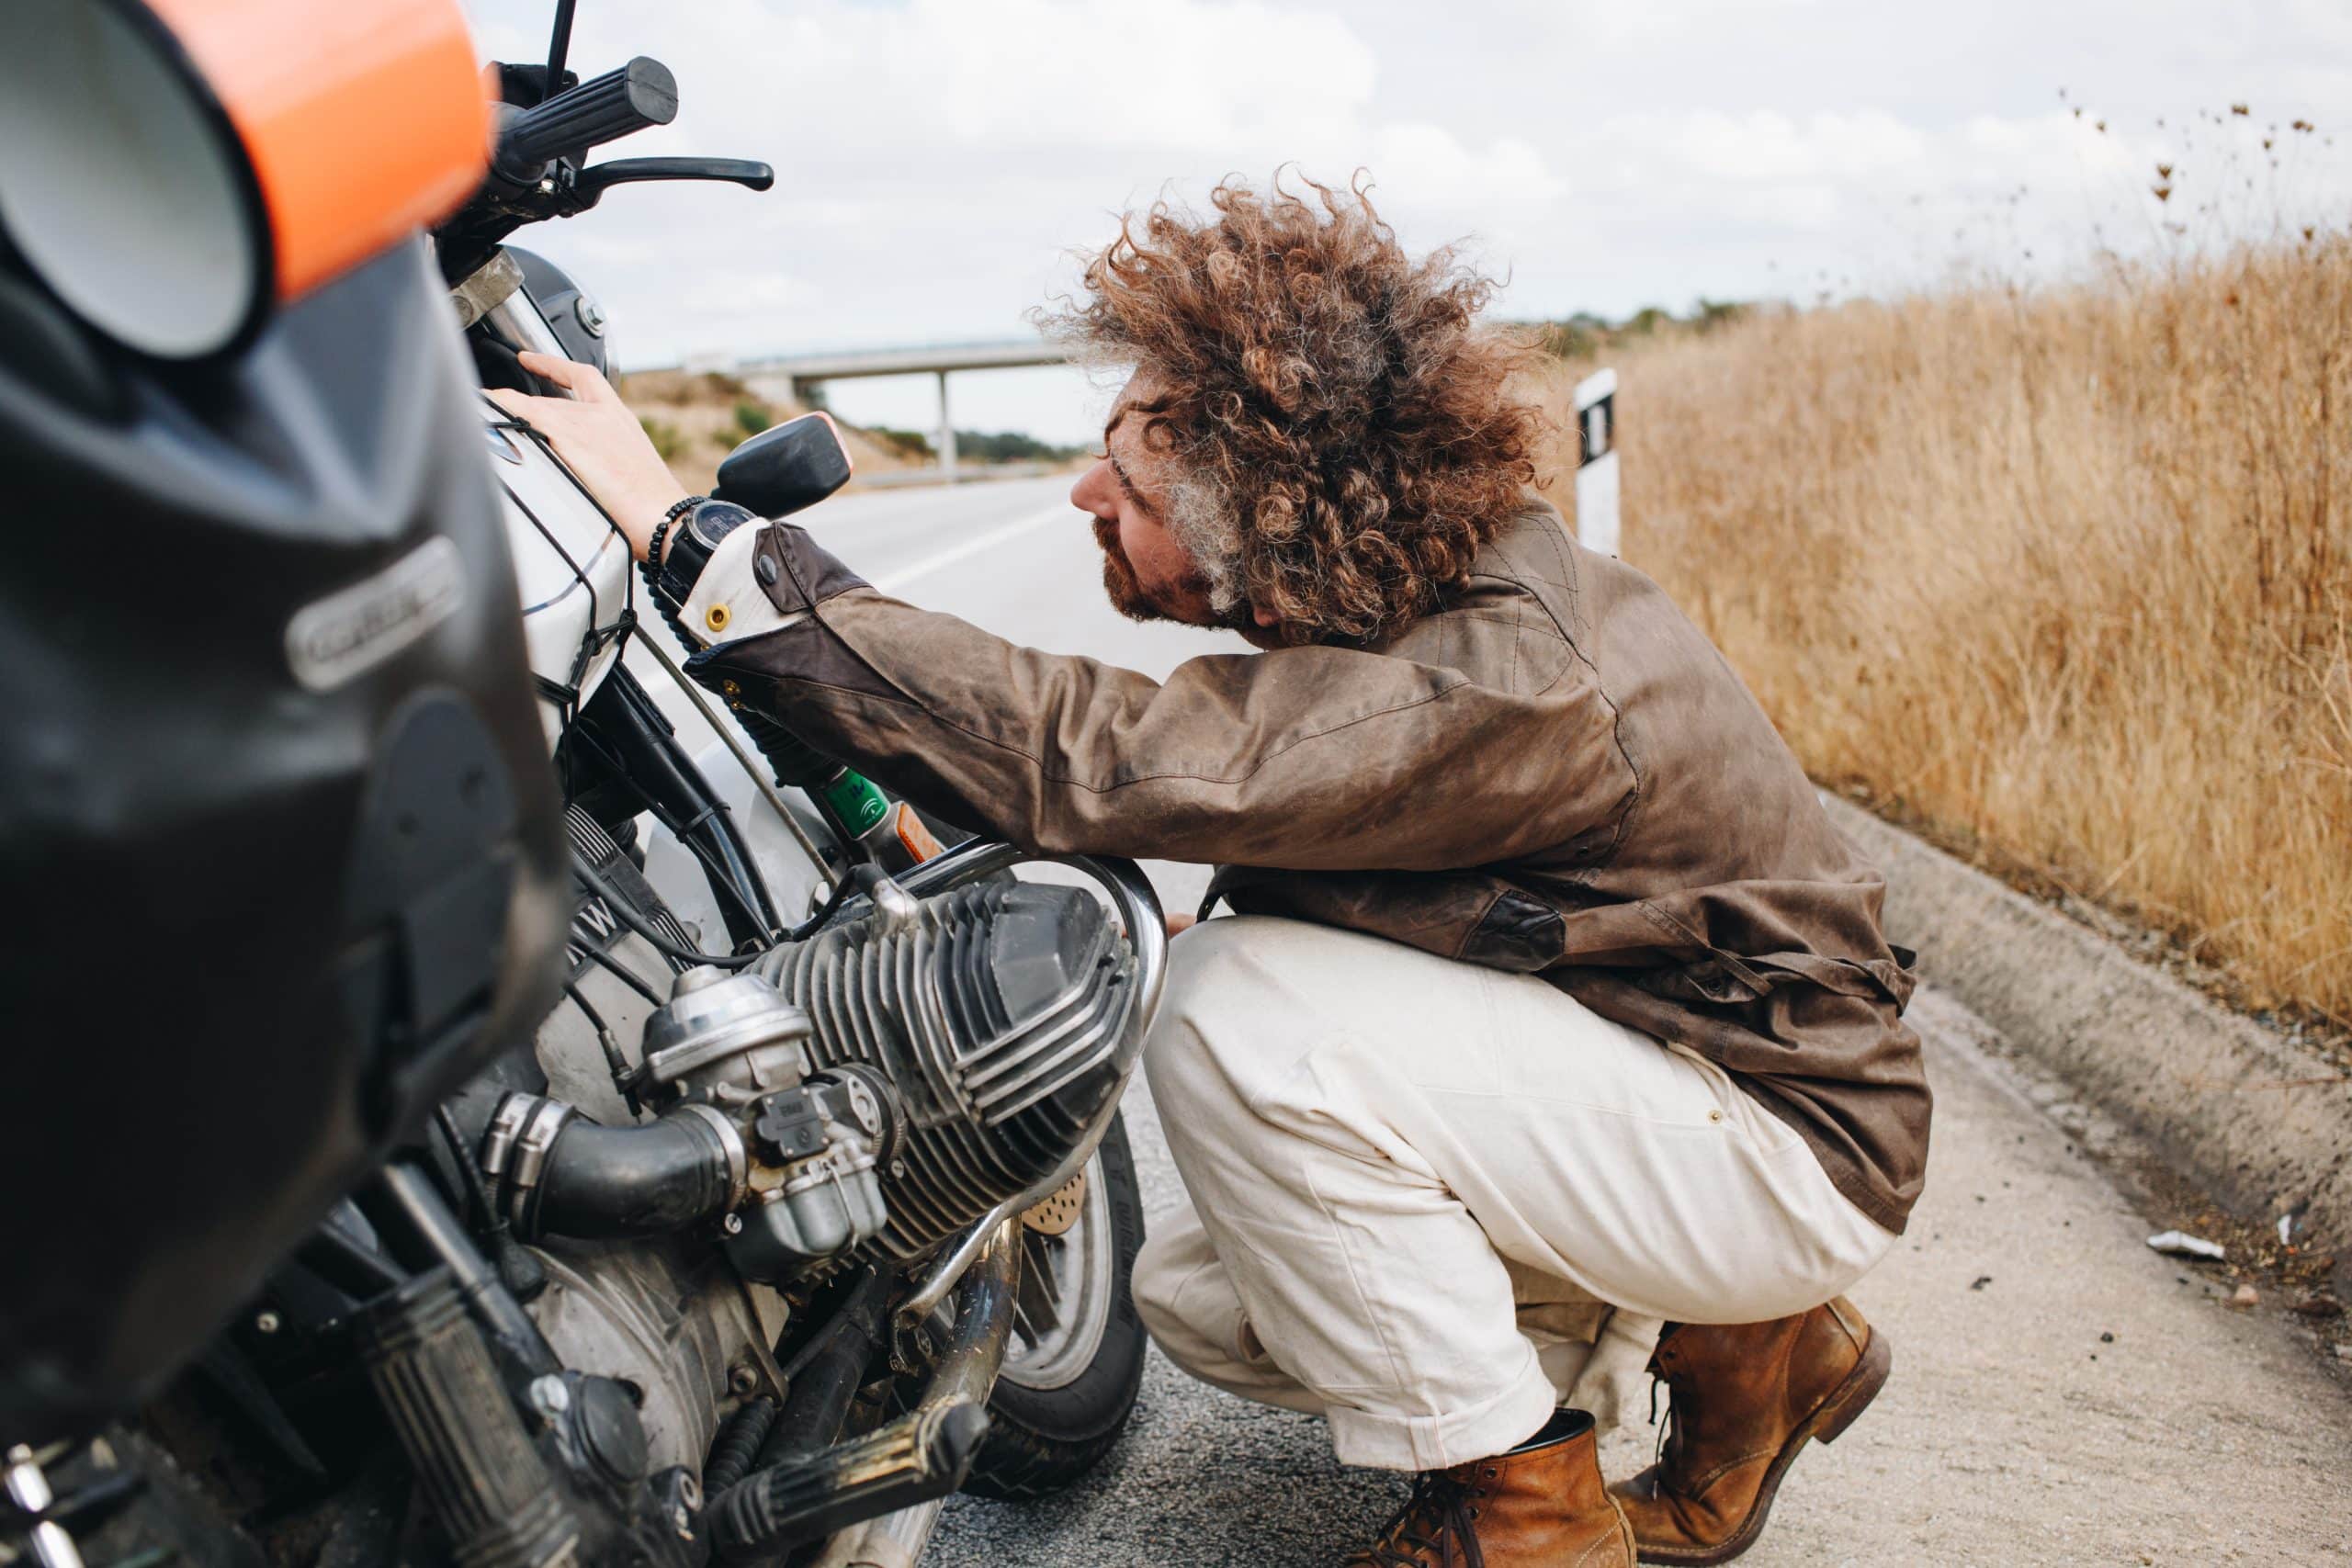 Importance of legal representation in motorcycle accidents